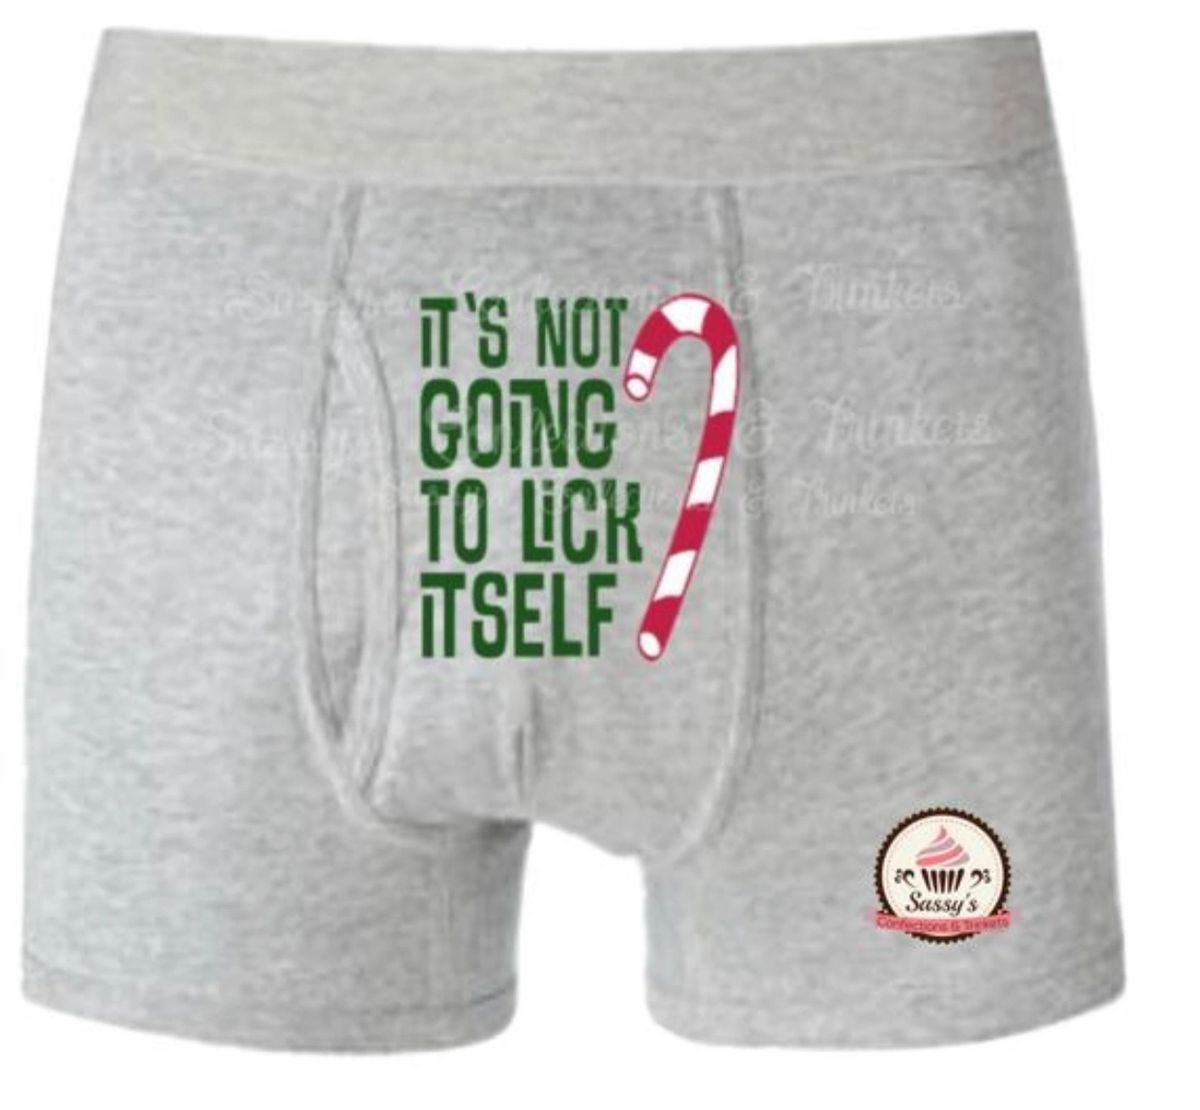 IT'S NOT GOING TO LICK ITSELF CANDY CANE BOXER BRIEFS | BOXERS NAUGHTY BUT  PRACTICAL (Size: XX-LARGE, Color: Black)